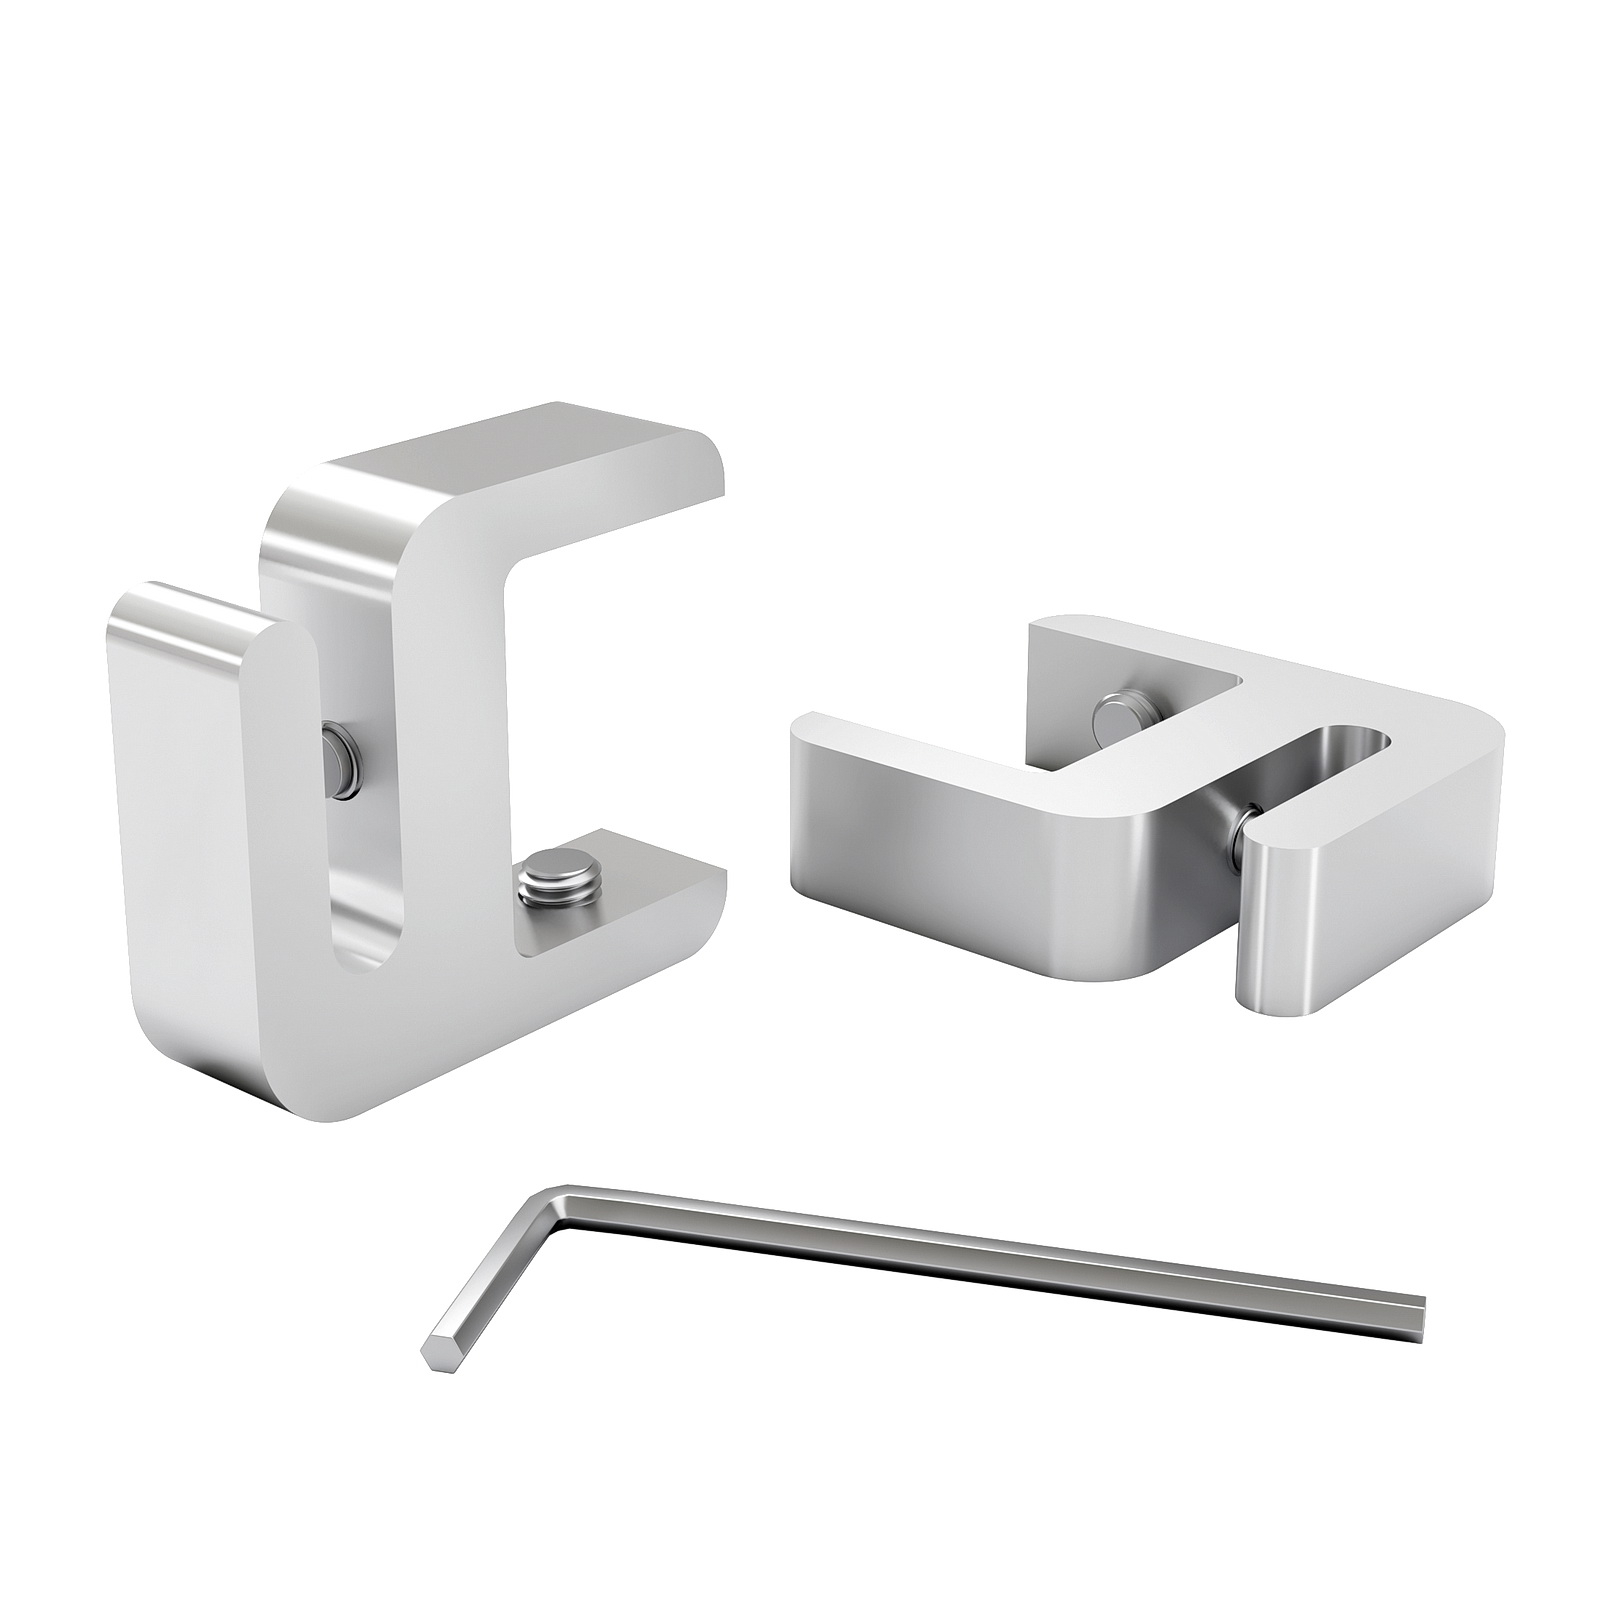 ''Set of 2,  Clamp, Aluminum Clear Anodized Finish, to Accommodate 1'' to 1-1/8'' Counters. Hold up to 1/4'' material thickness M6 Set screw need 3mm Allen Wrench''